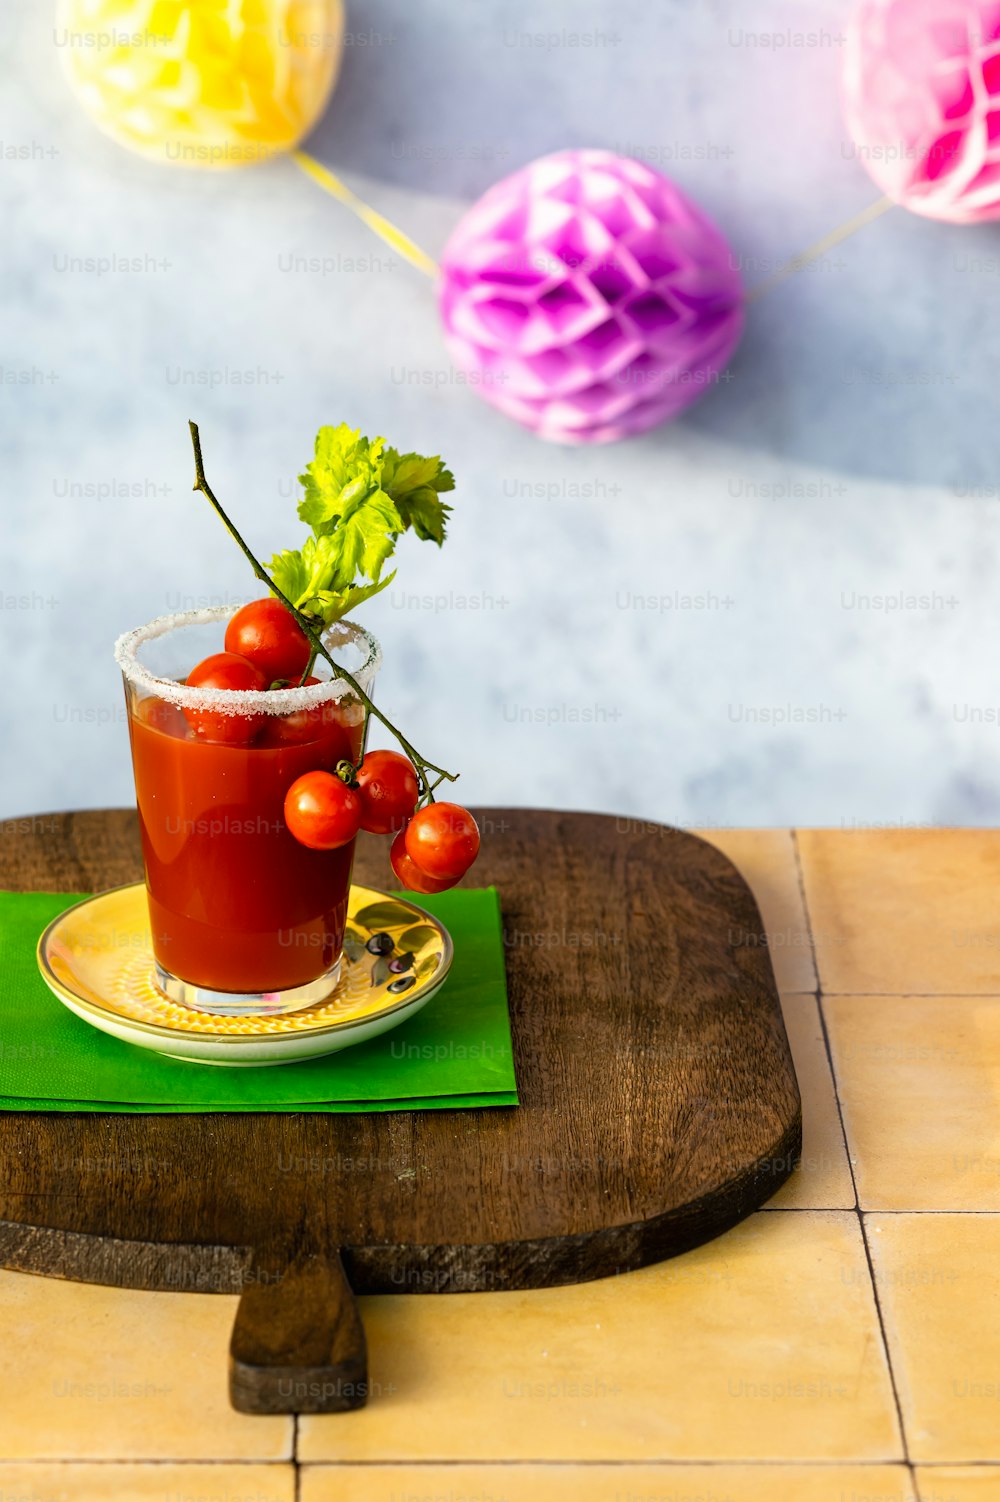 a bloody drink with cherry tomatoes on a plate